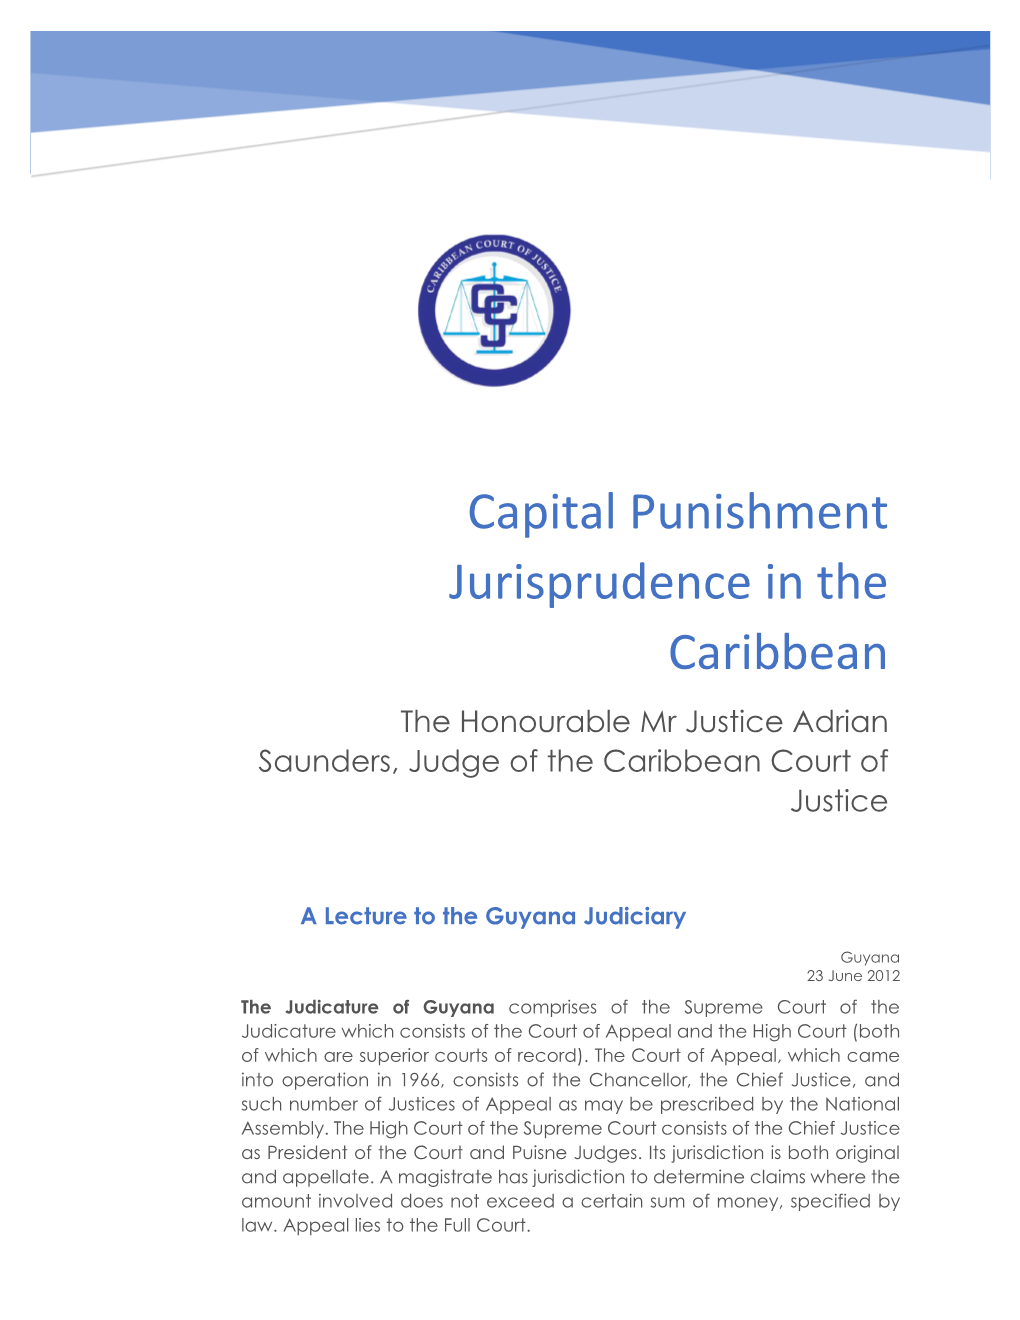 Capital Punishment Jurisprudence in the Caribbean the Honourable Mr Justice Adrian Saunders, Judge of the Caribbean Court of Justice